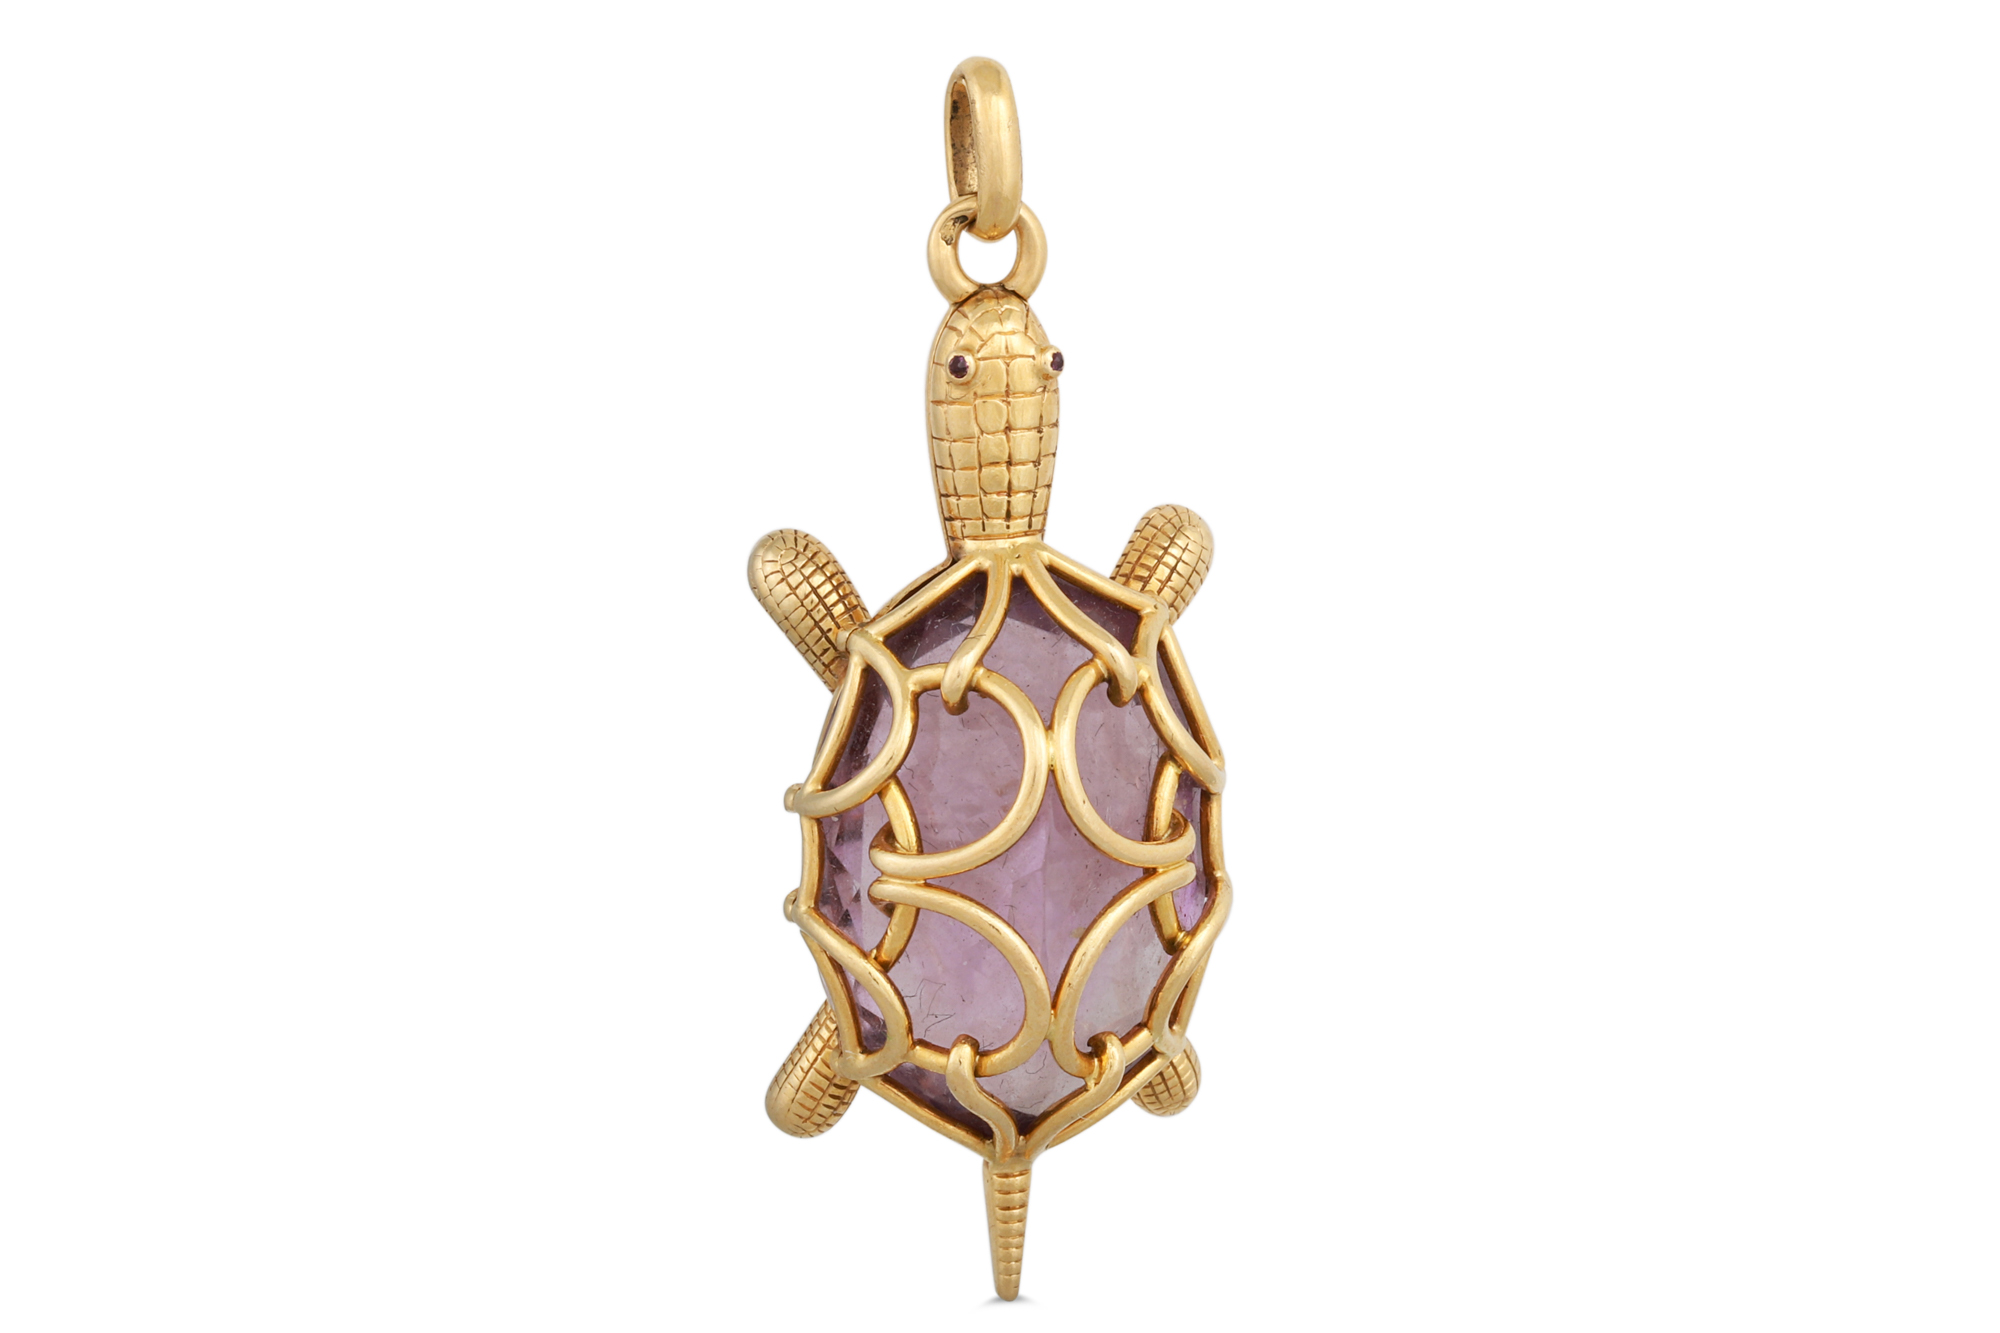 A CHAUMET TORTOISE PENDANT, in yellow gold, amethyst body and eyes, French assay mark for 18ct gold,